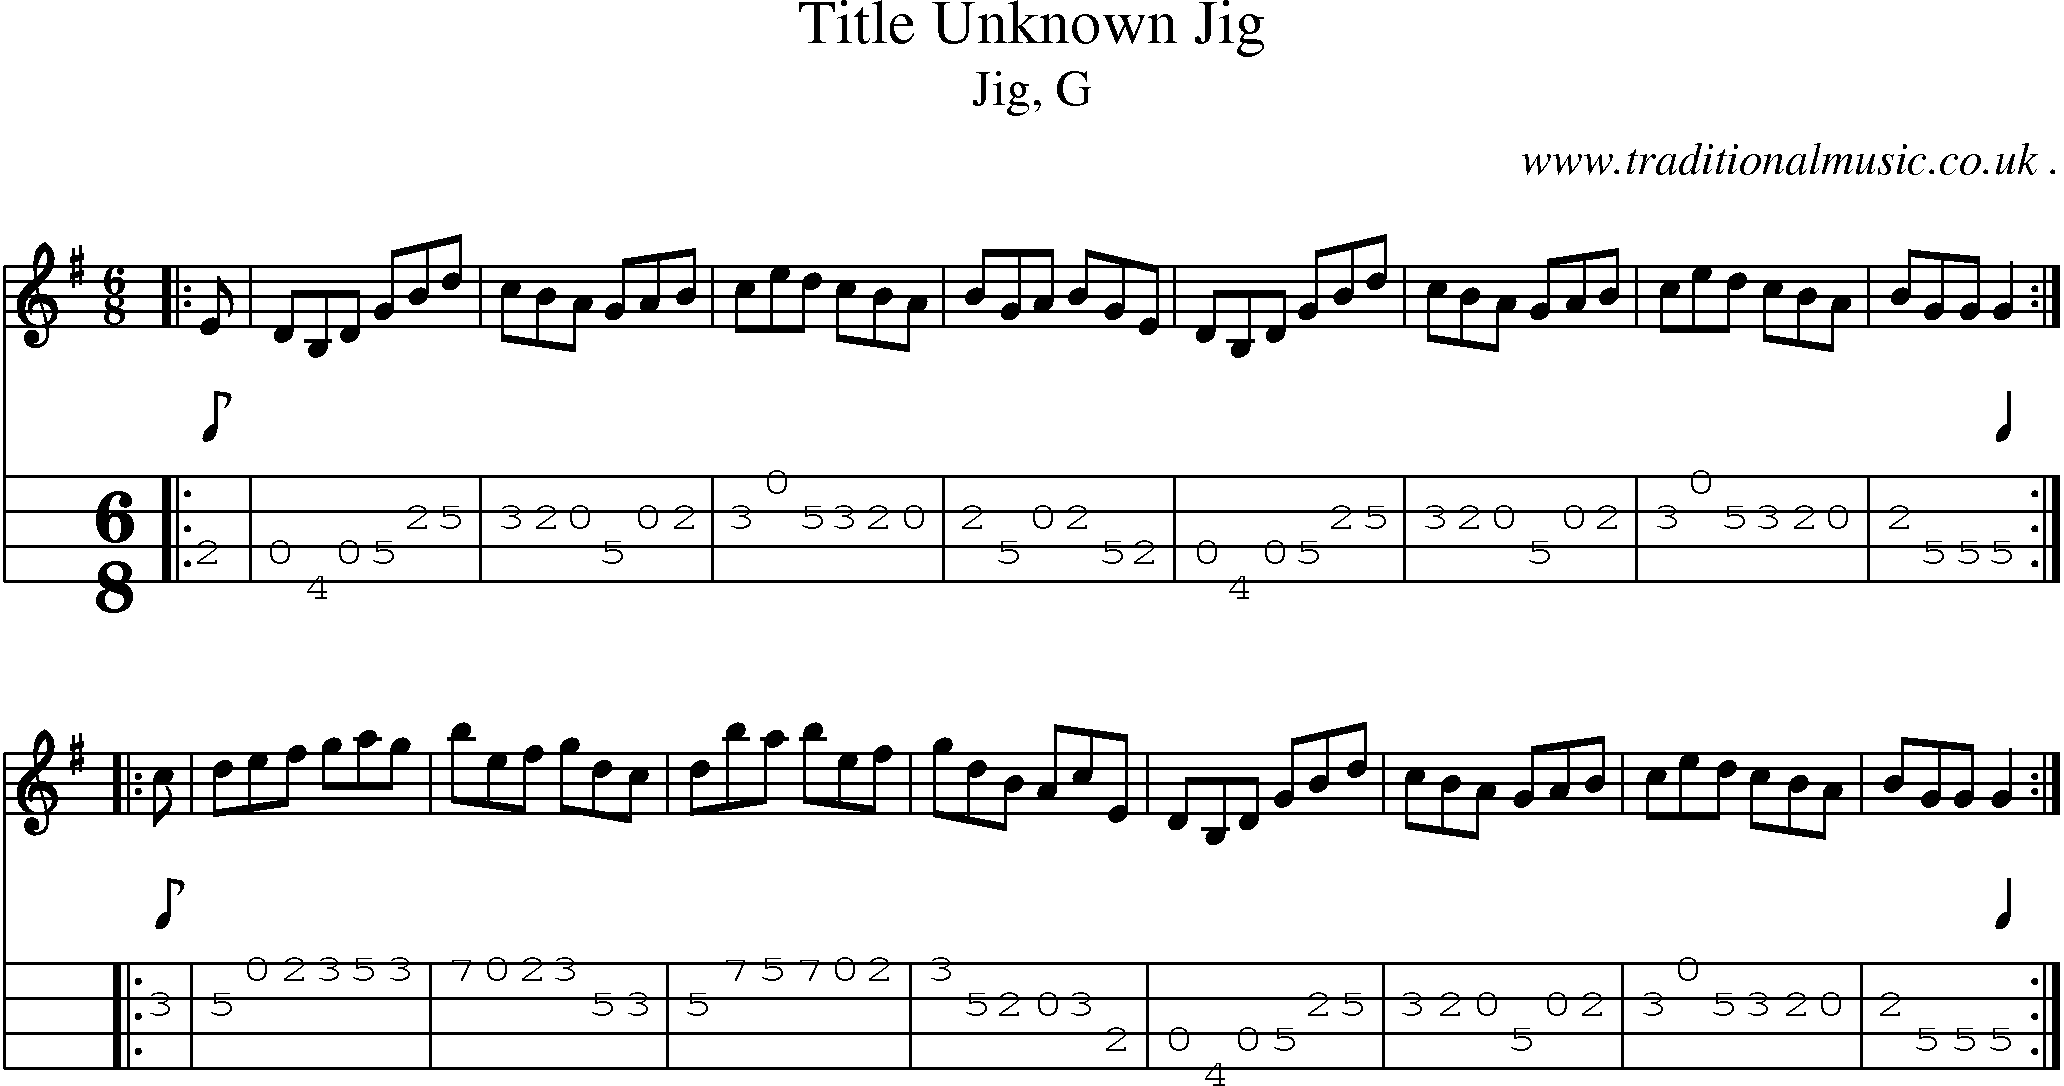 Sheet-music  score, Chords and Mandolin Tabs for Title Unknown Jig